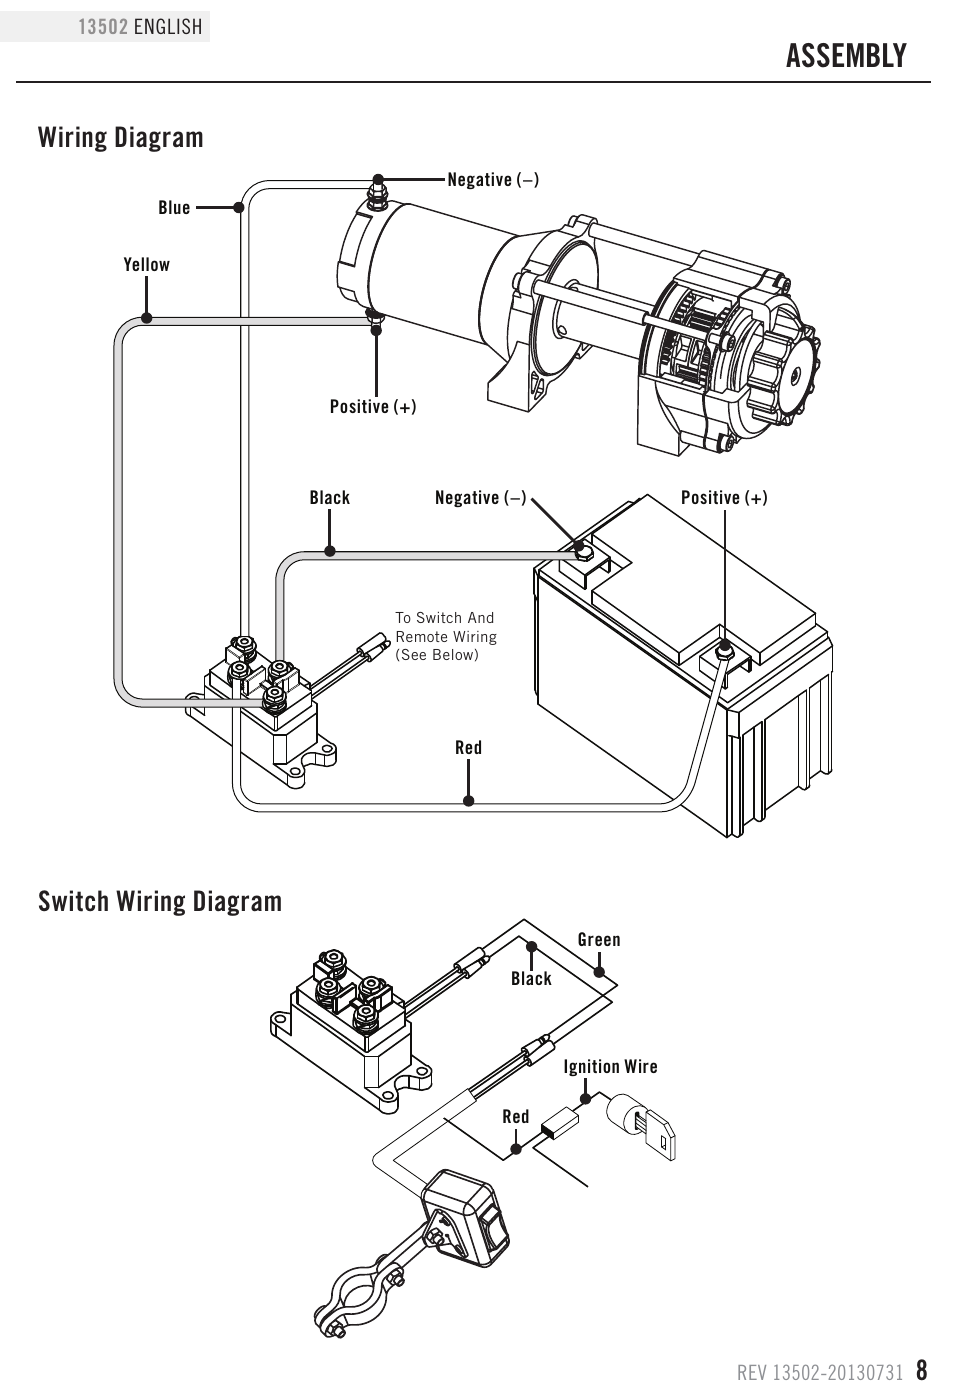 Assembly  Wiring Diagram Switch Wiring Diagram